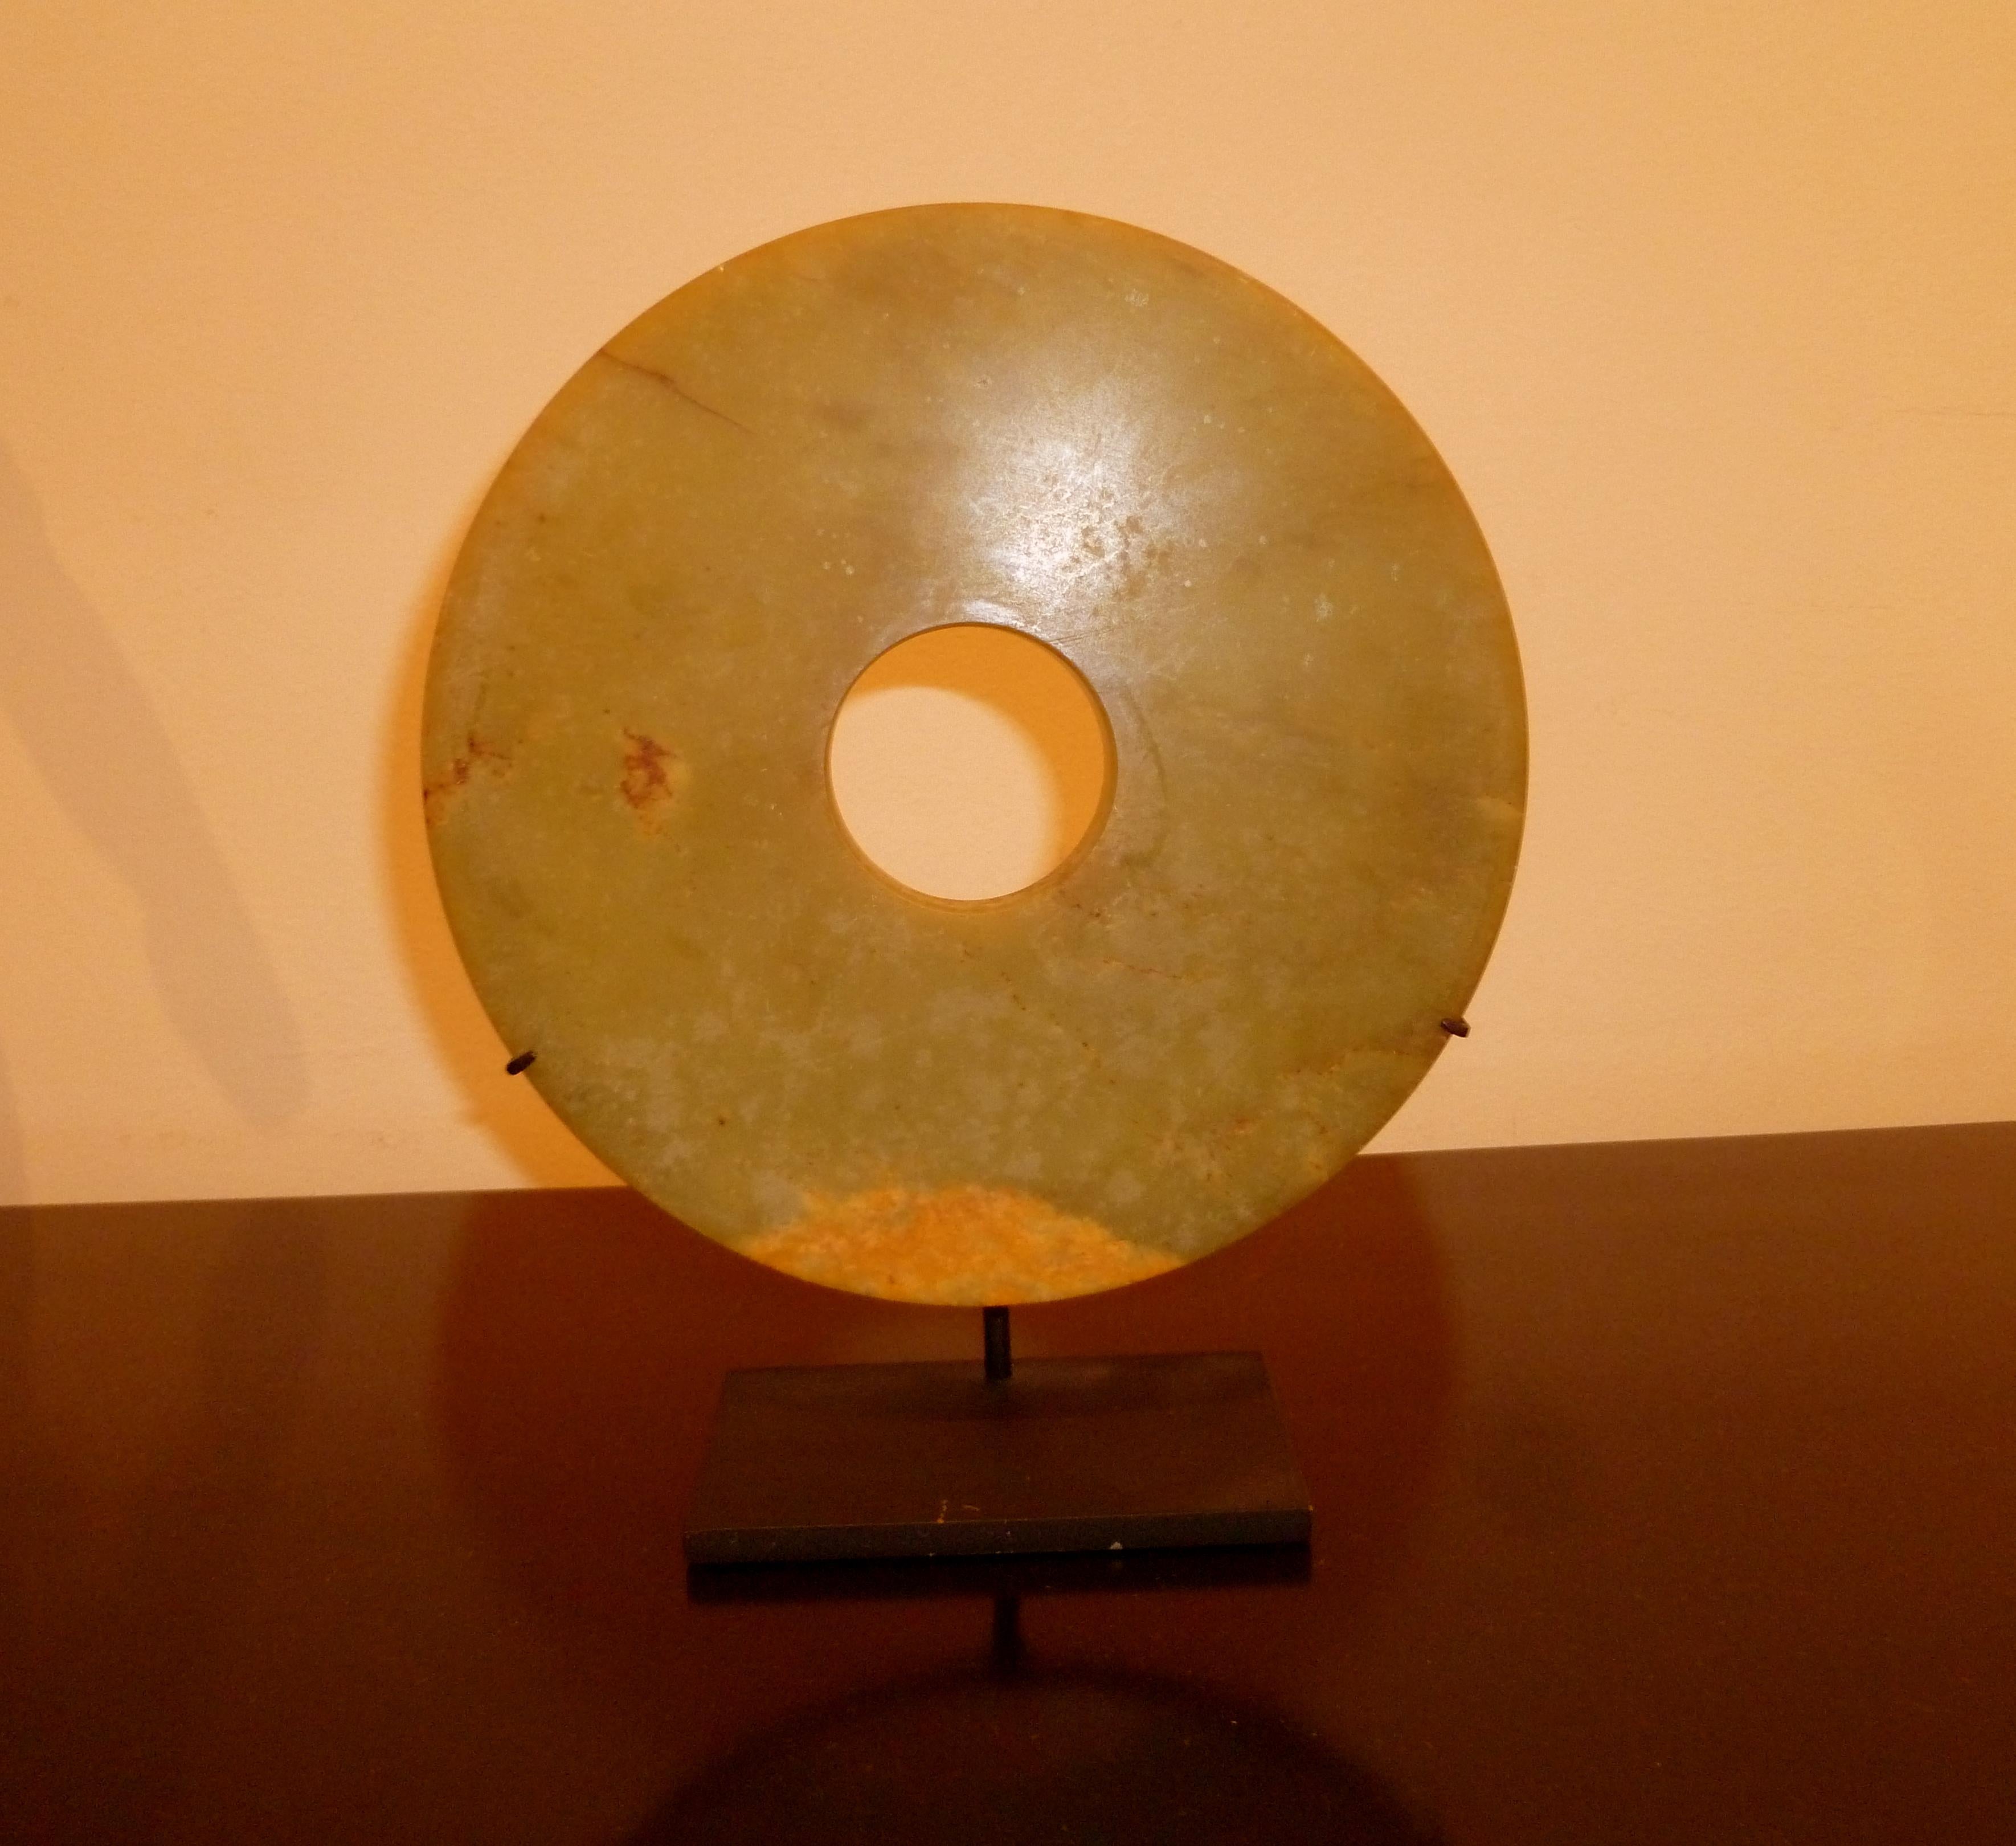 Fine Chinese hard stone disc on black metal stand, beautiful form, color and texture. Measures: 7